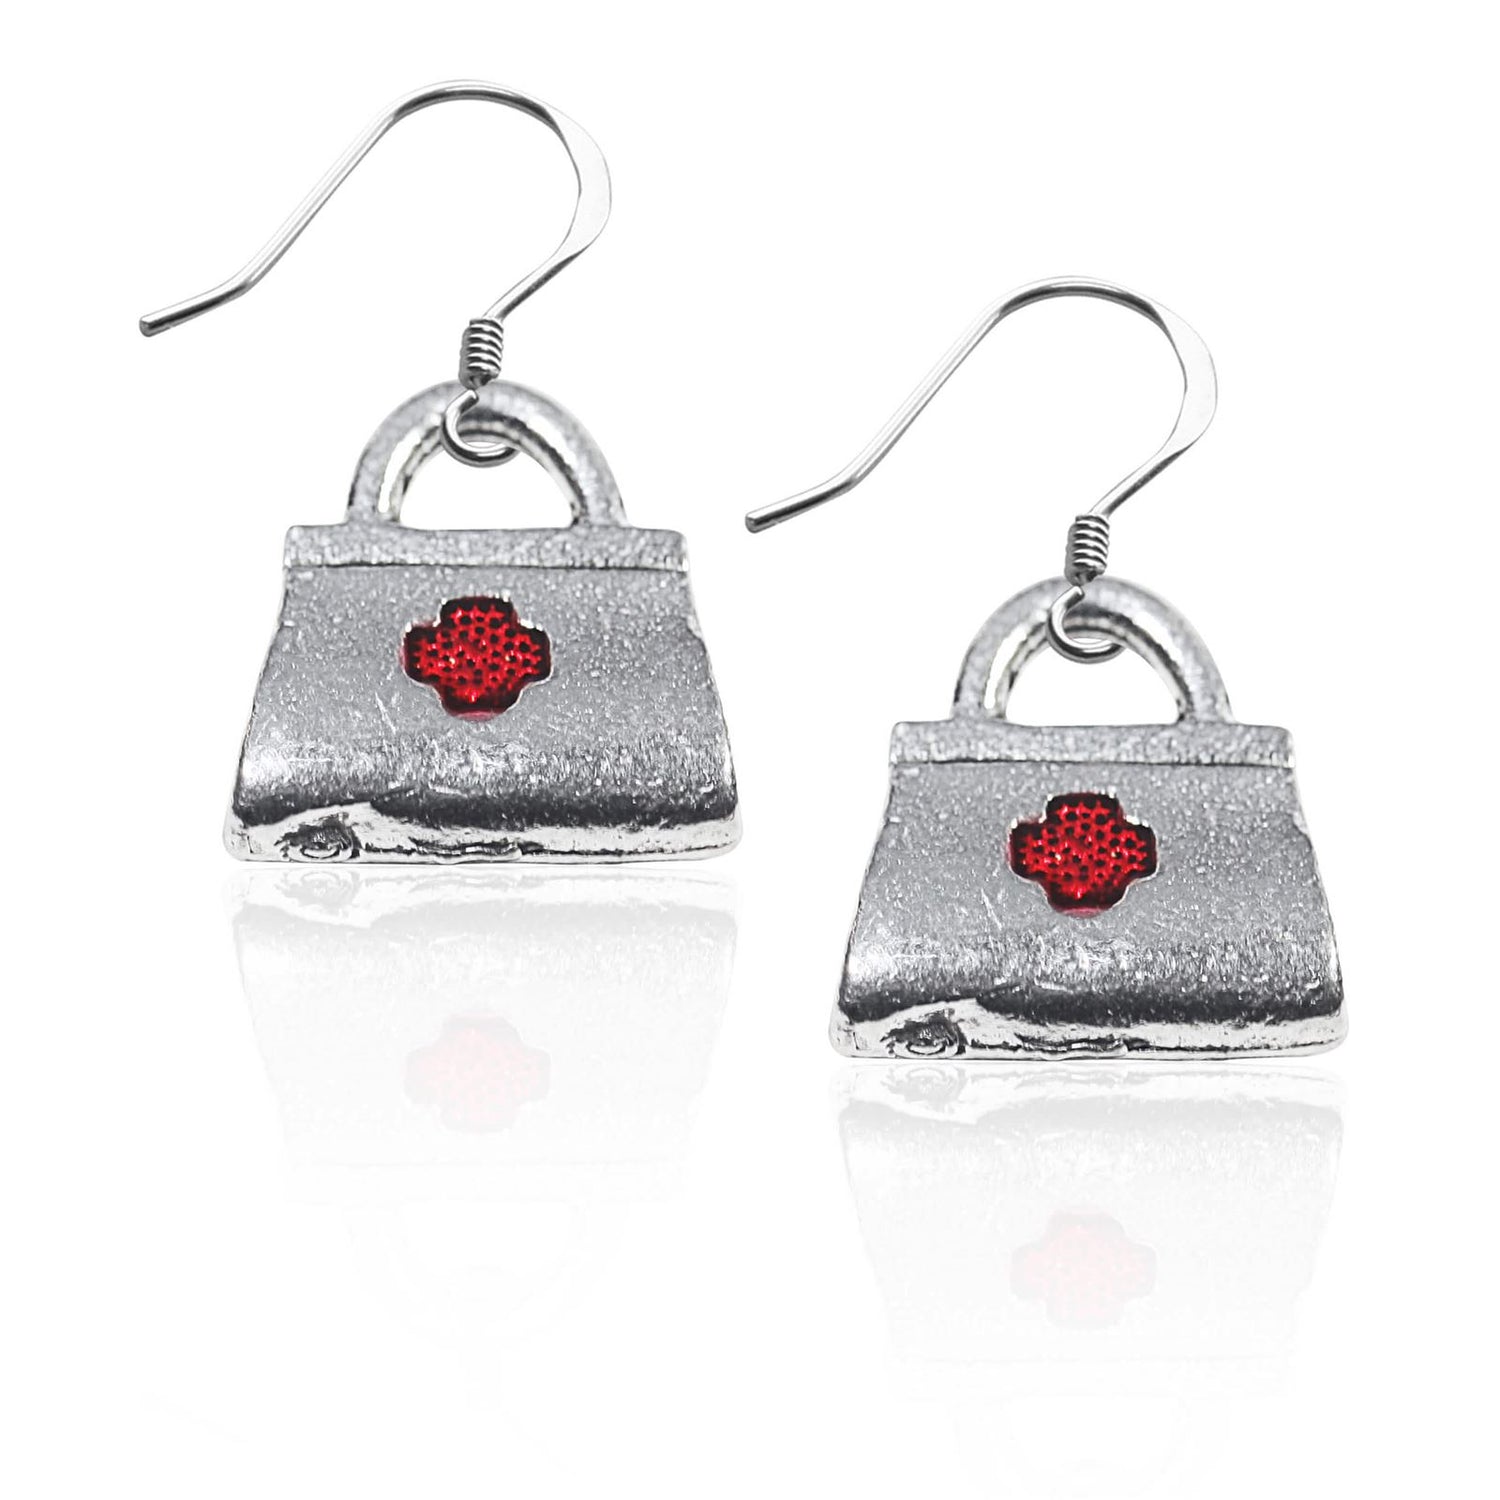 Whimsical Gifts | Medical Bag Charm Earrings in Silver Finish | Professions Themed | Dental | Medical | First Responder | Jewelry